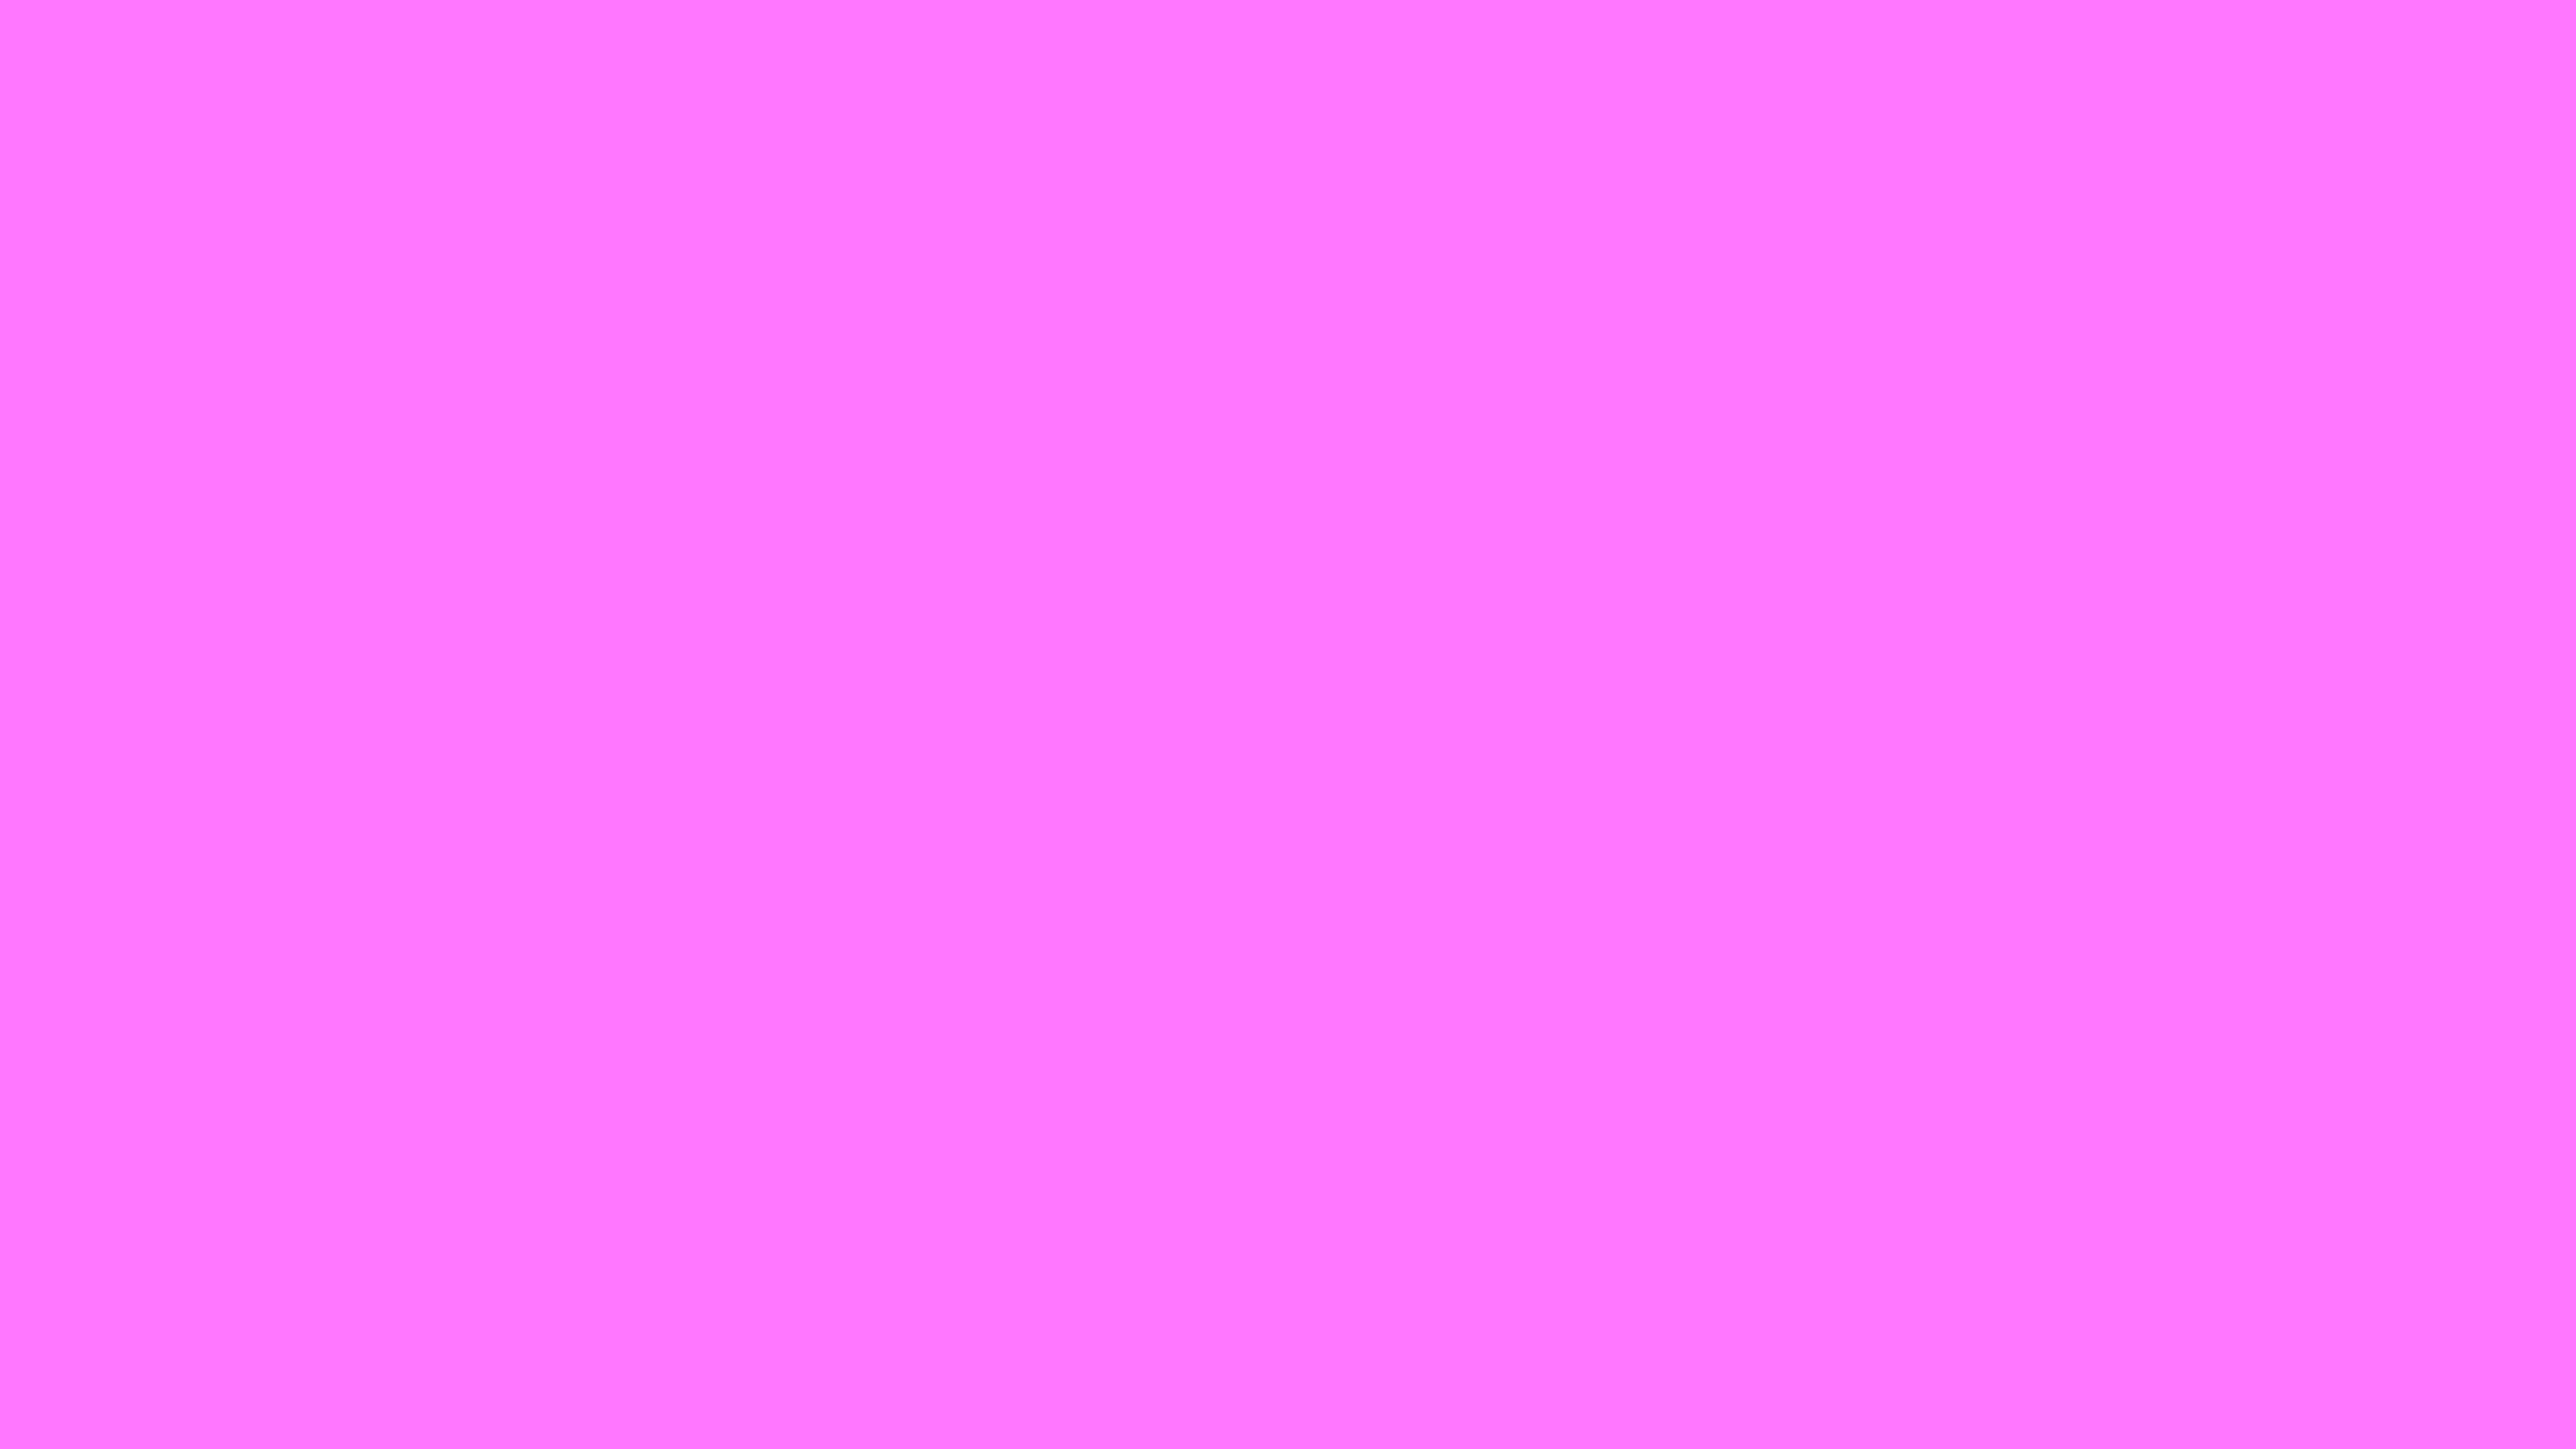 7680x4320 Fuchsia Pink Solid Color Background